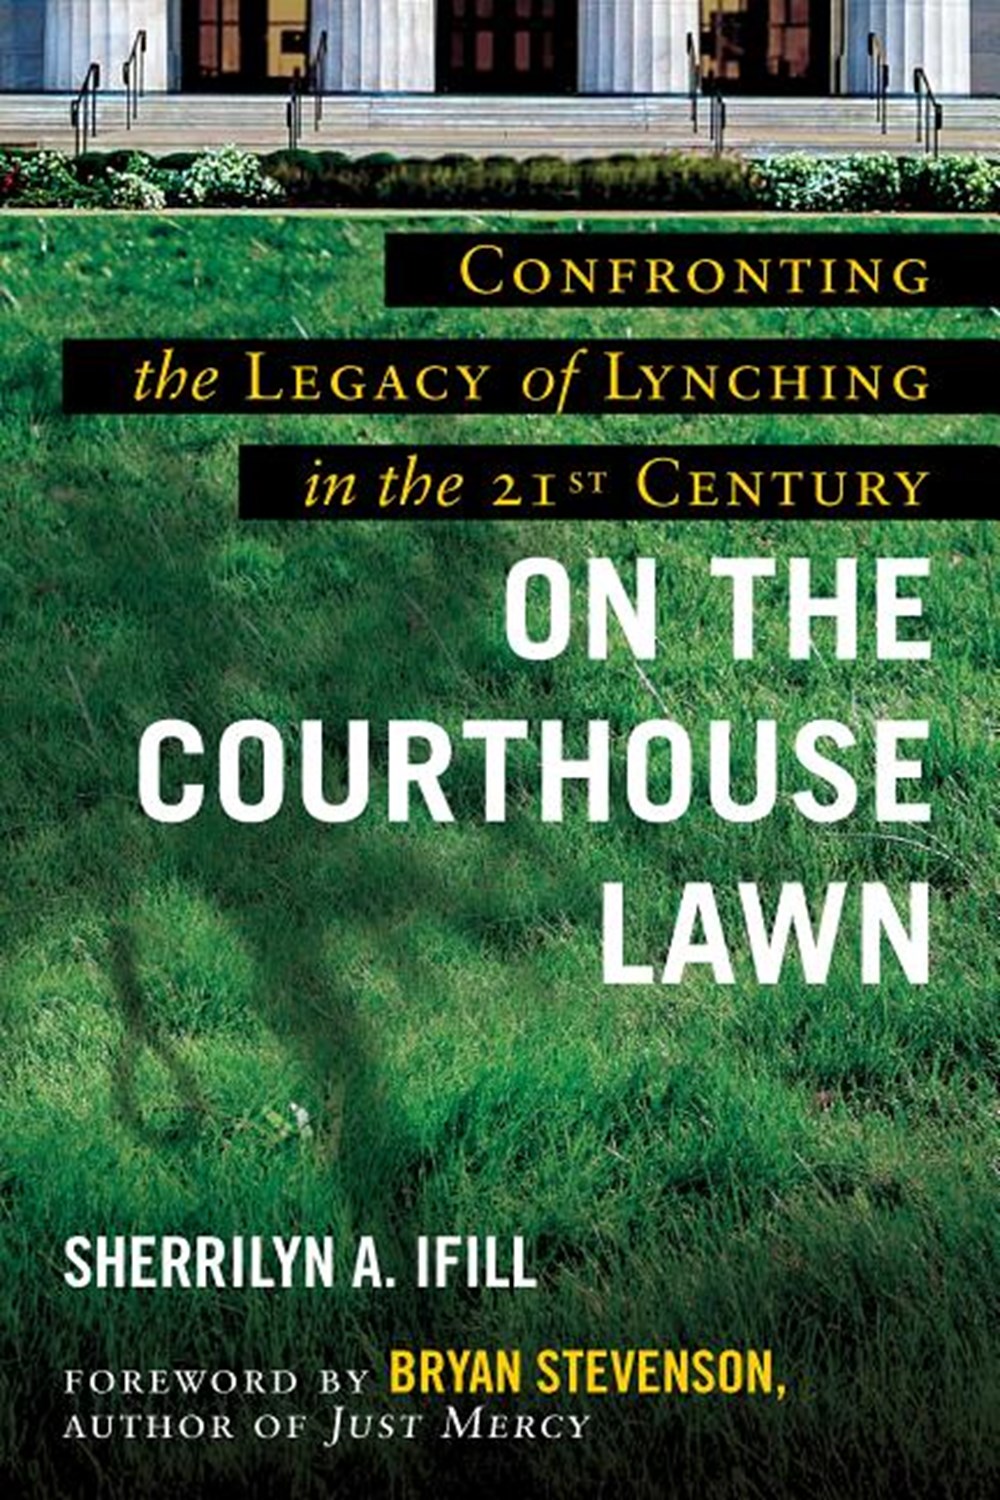 On the Courthouse Lawn, Revised Edition Confronting the Legacy of Lynching in the Twenty-First Centu